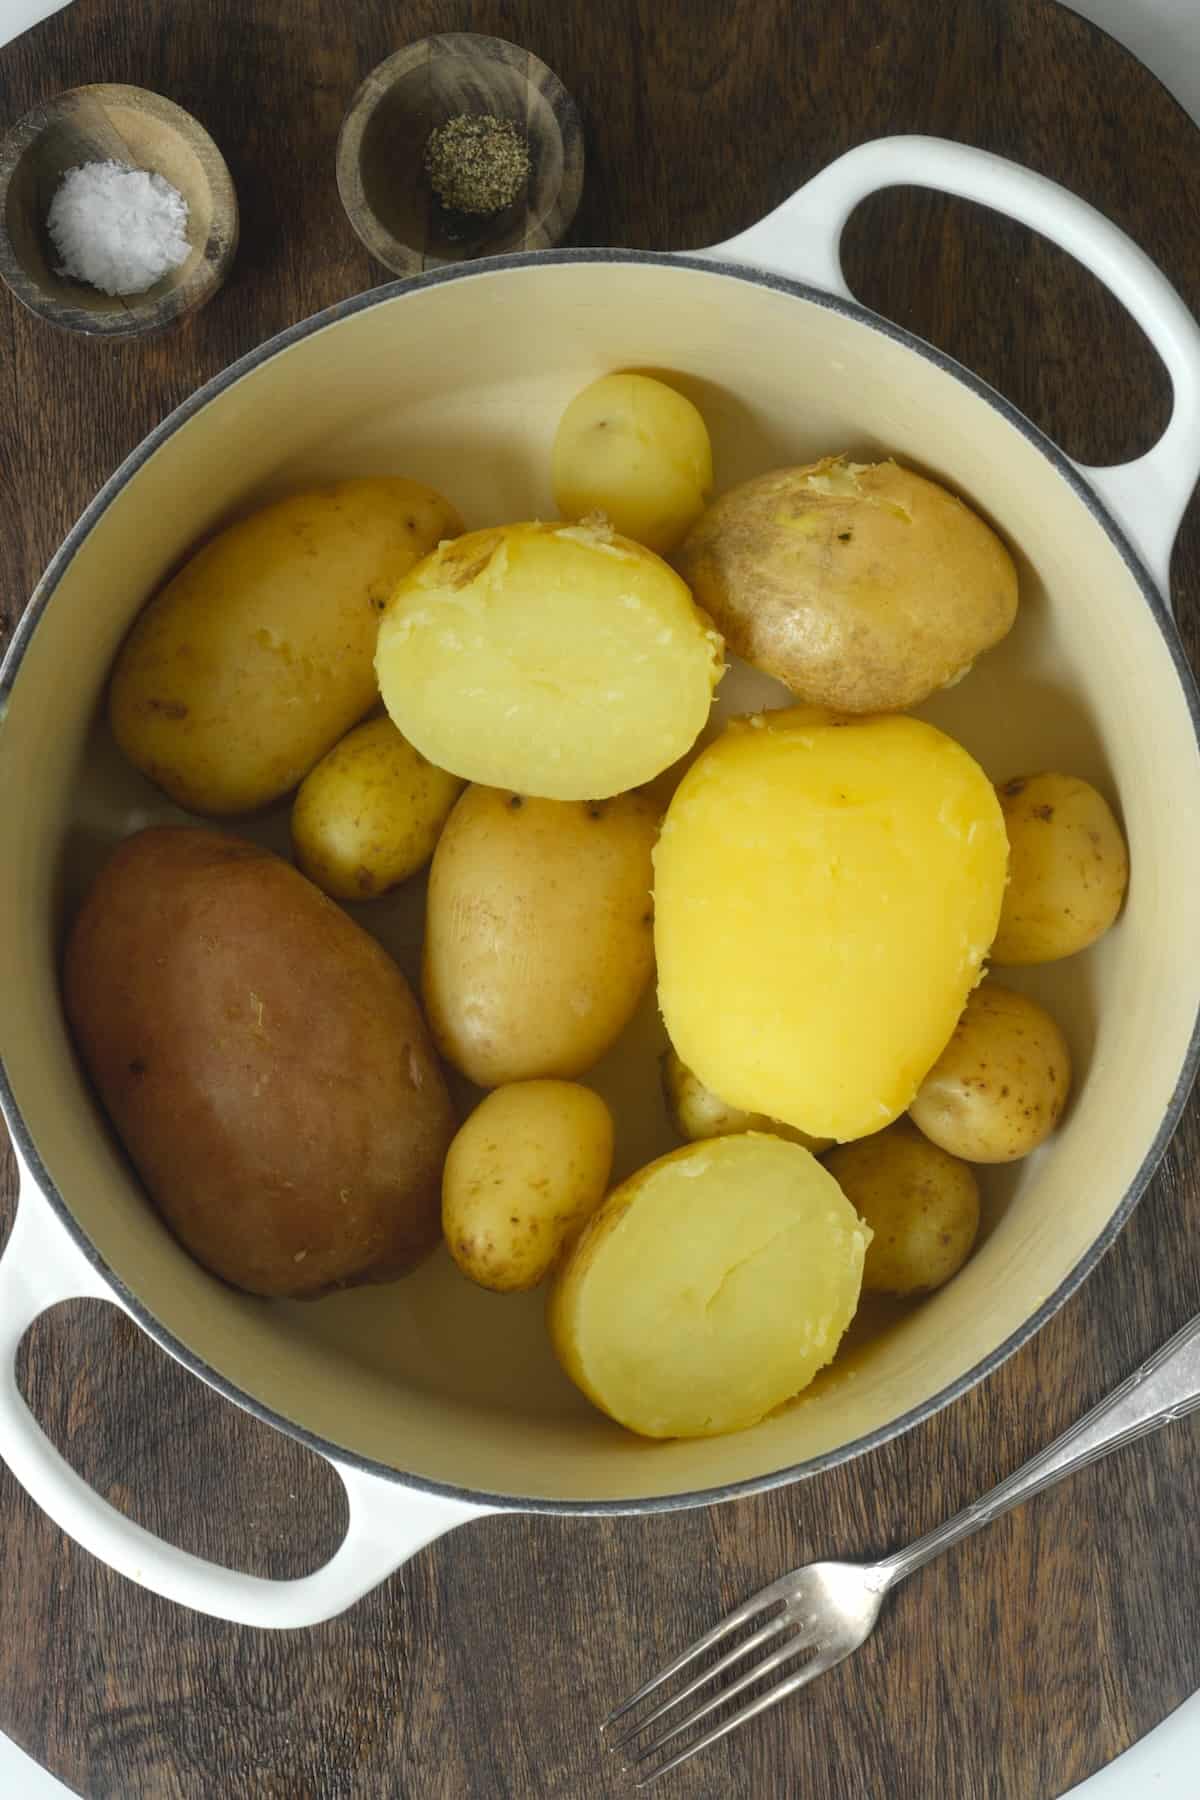 https://www.alphafoodie.com/wp-content/uploads/2022/09/How-to-boil-potatoes-Main1-1.jpeg